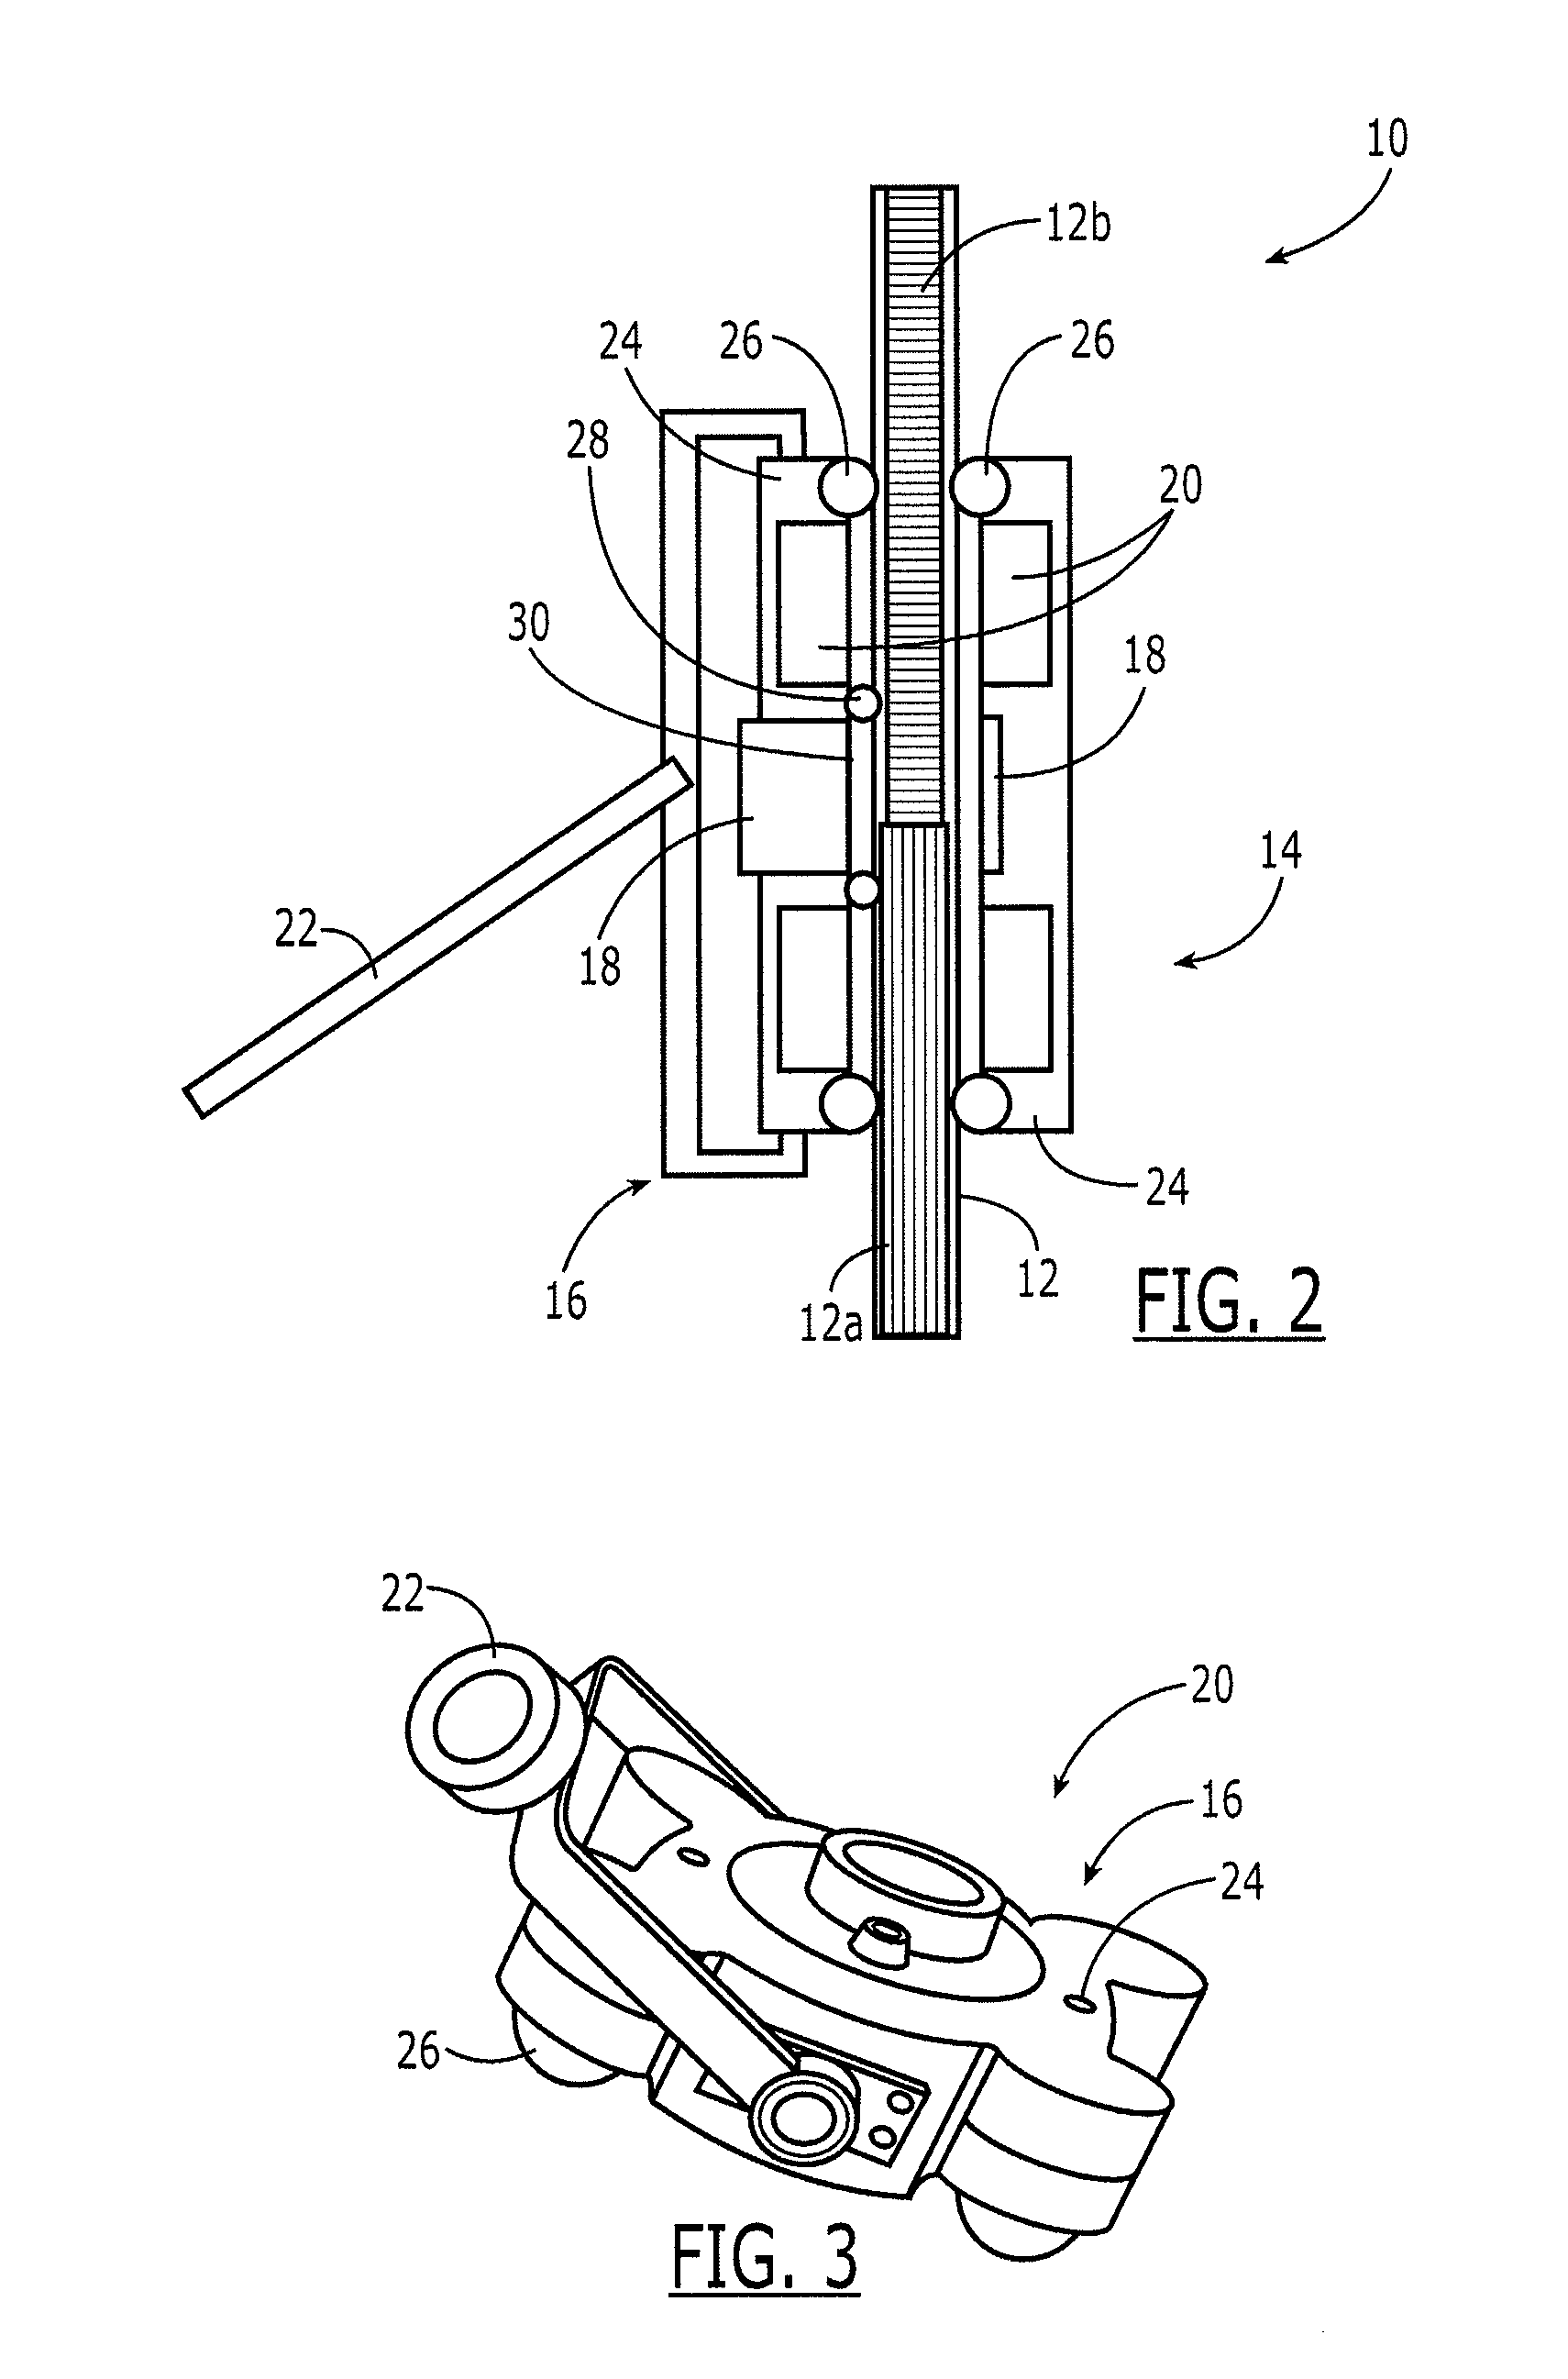 Hybrid Inspection System And Method Employing Both Air-Coupled And Liquid-Coupled Transducers